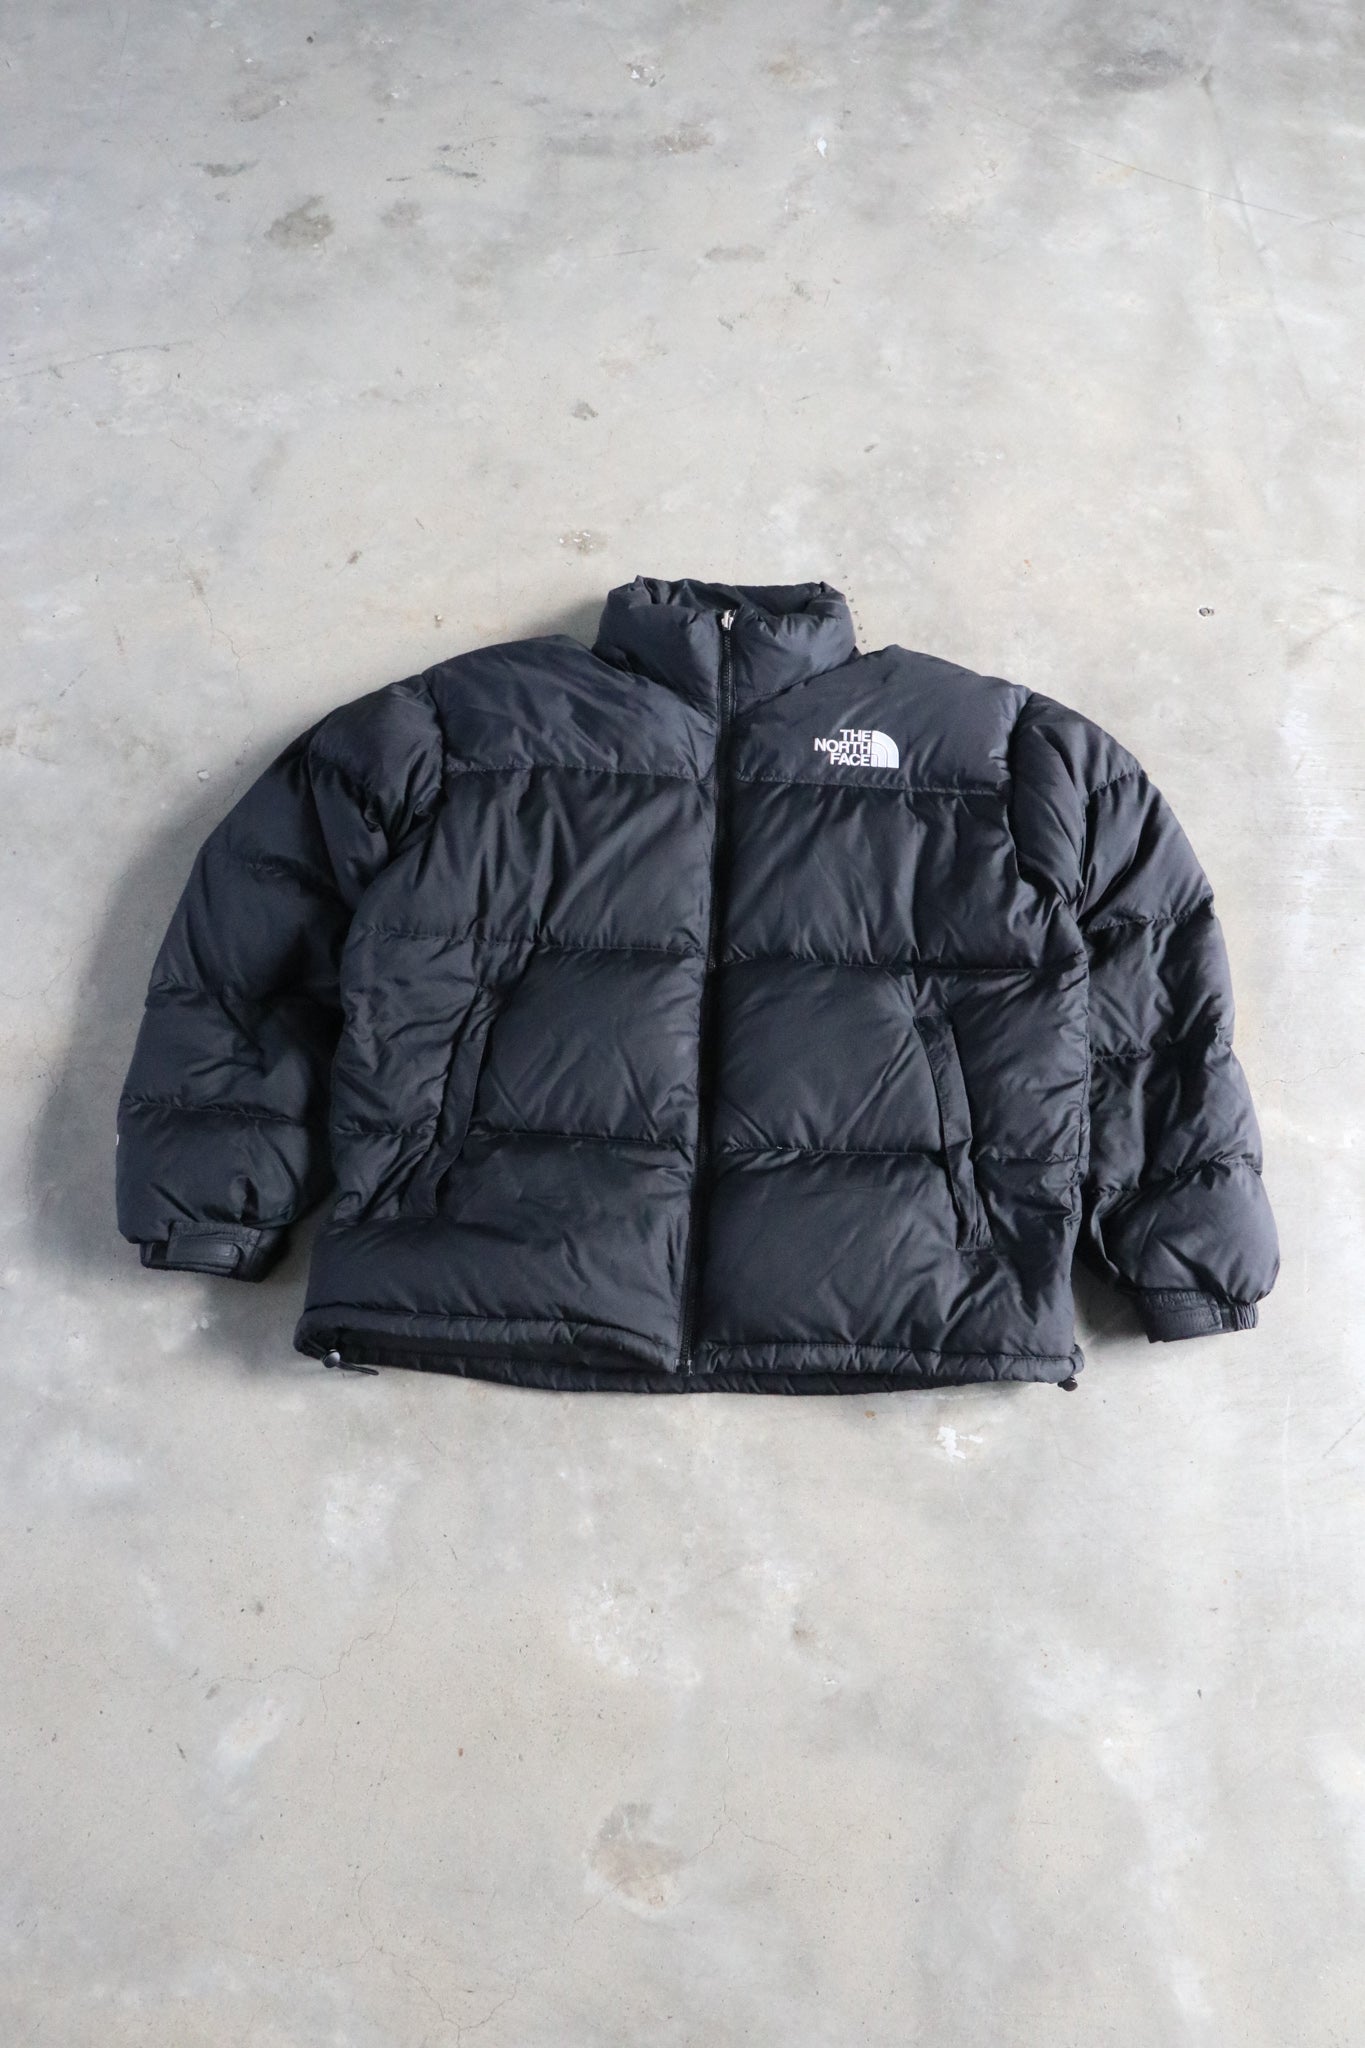 Vintage The North Face 700 Series Puffer Jacket XL